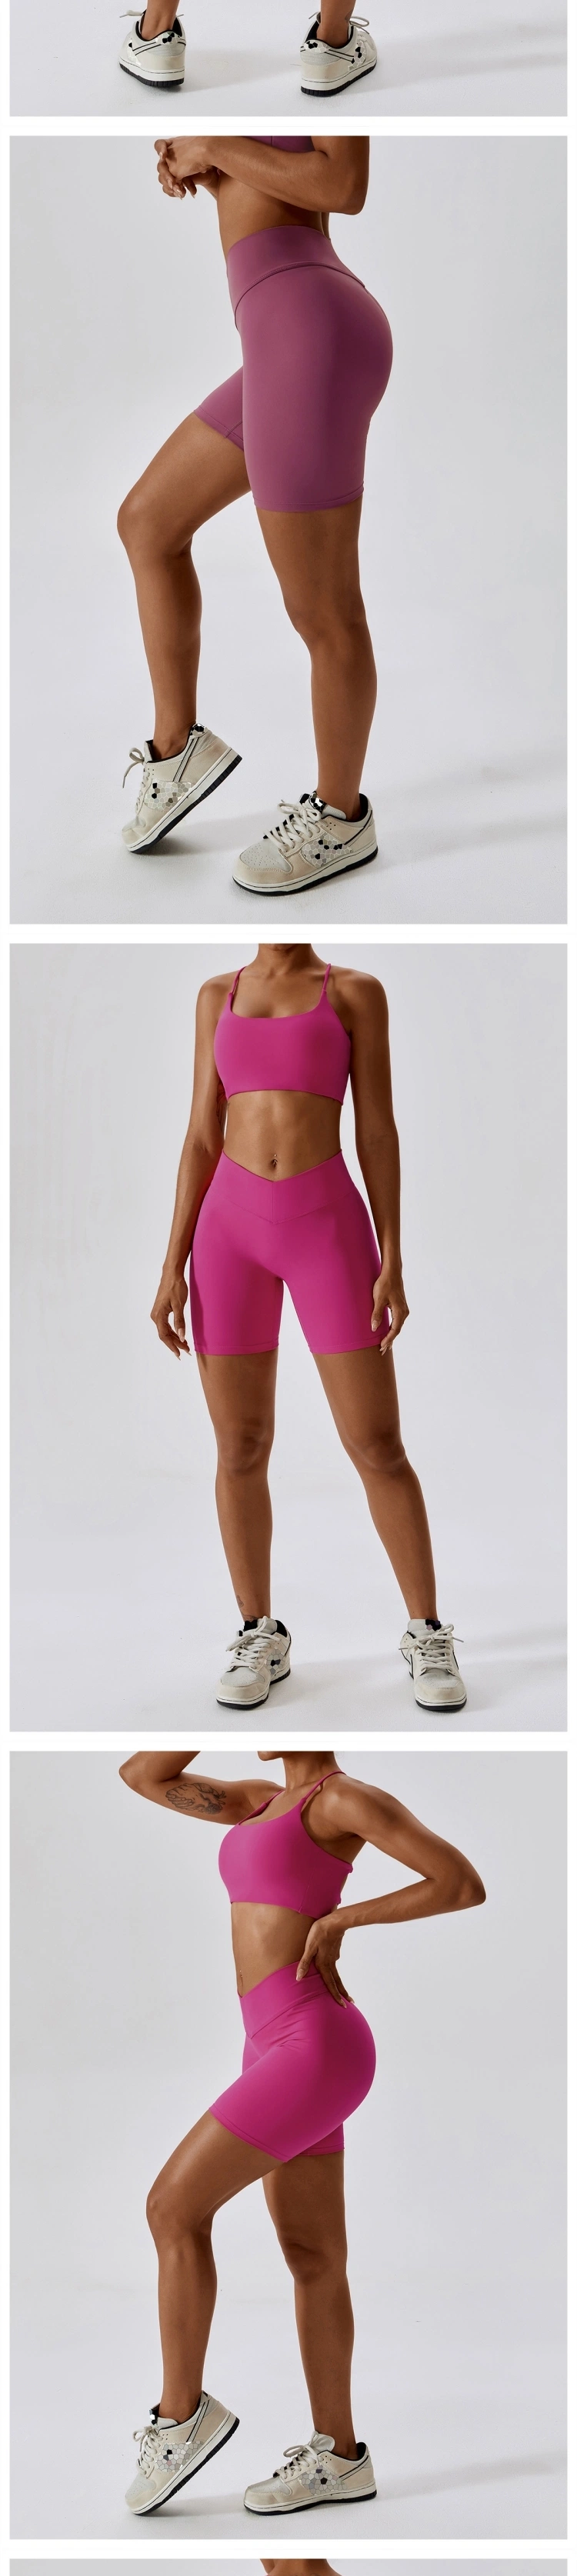 Wholesale Factory Sexy Bra Twist Front Cross Back Clothes Outfit Exercises Workout Running Fitness Suit Gym Sports Wear Yoga Set